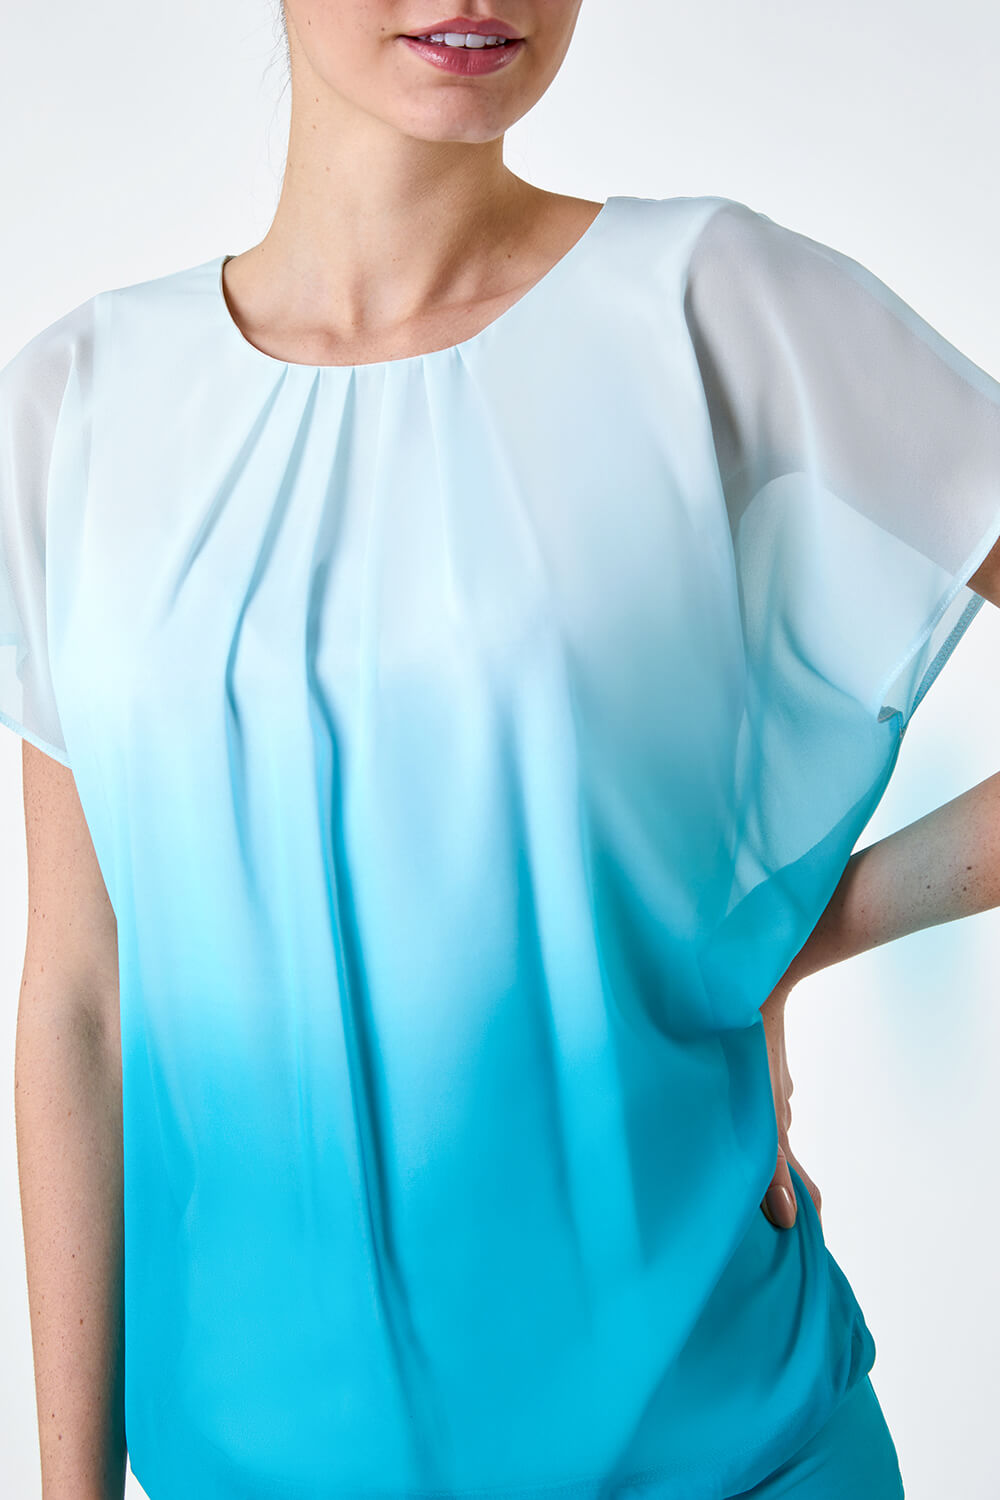 Blue Ombre Chiffon Overlay Blouson Top, Image 5 of 5